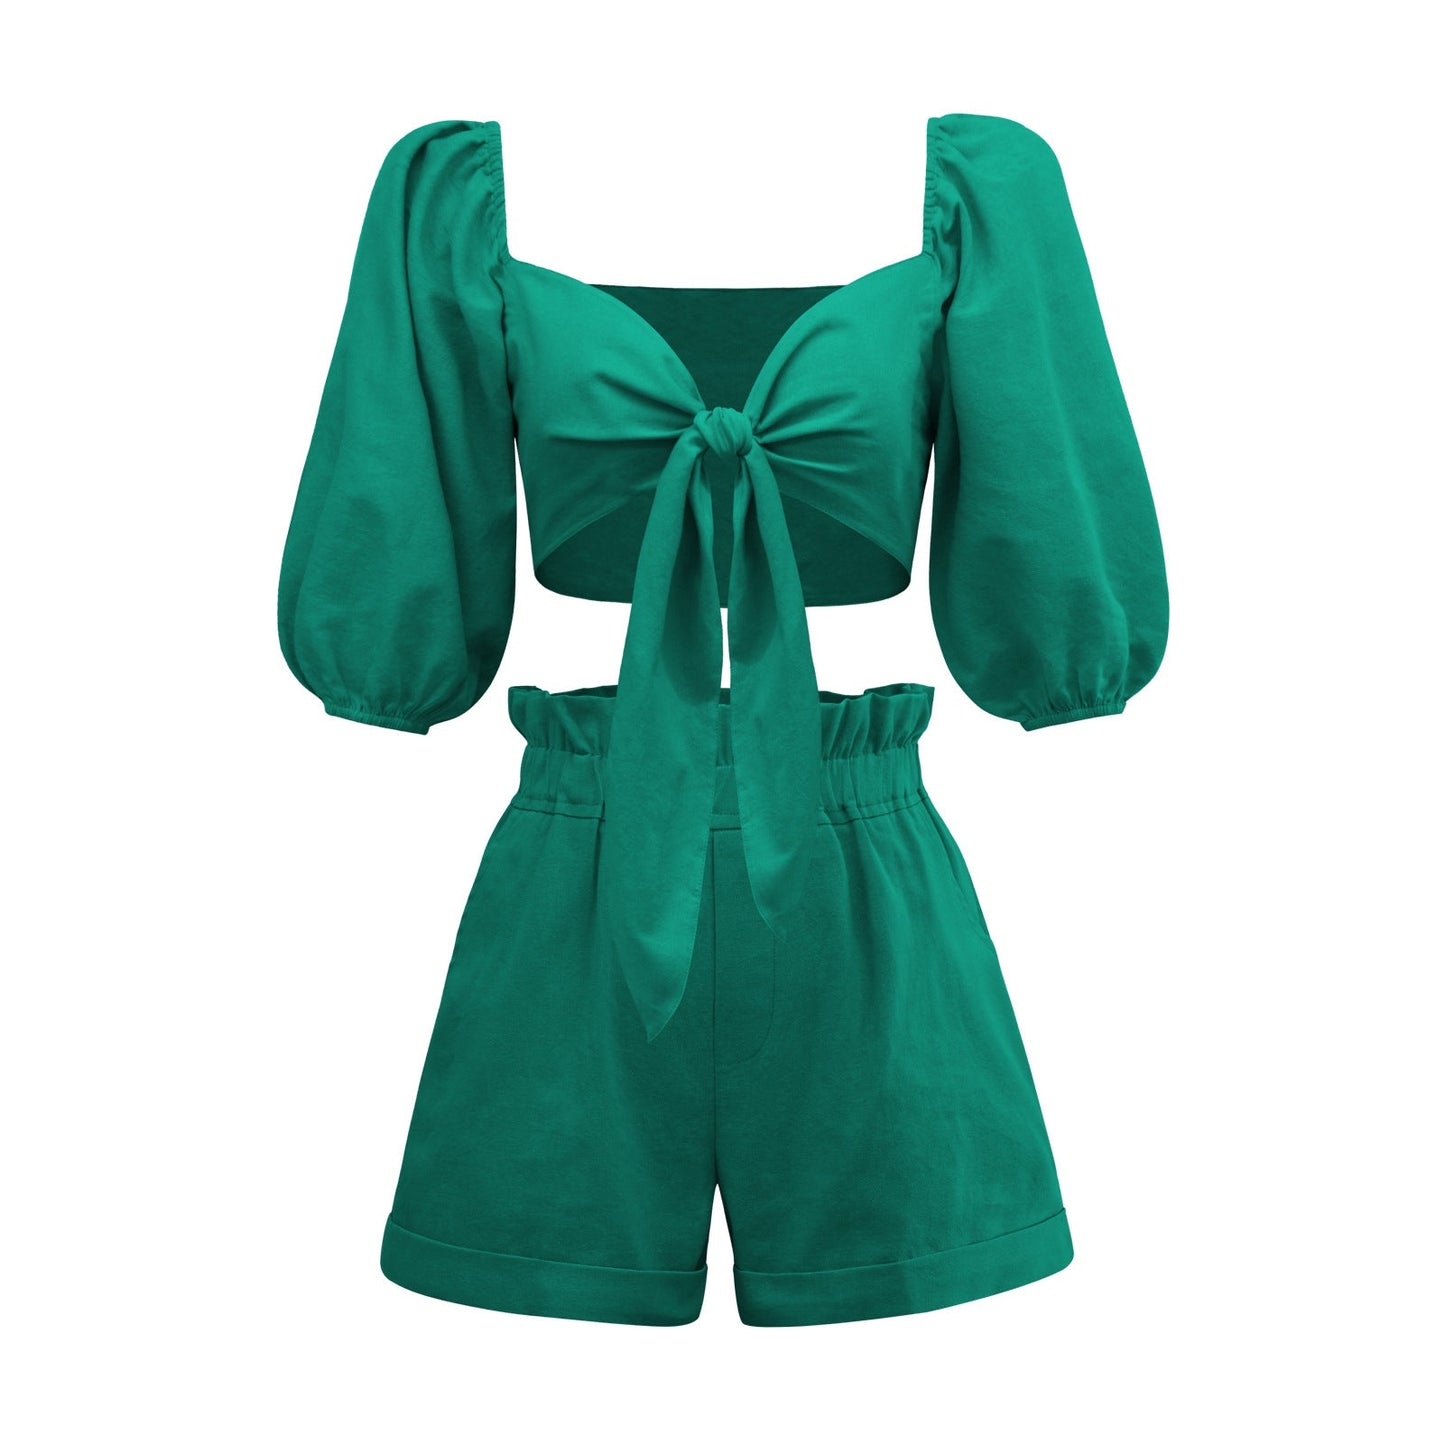 Casual Short Midriff Baring Tops and Shorts Sets for Women-Suits-Green-S-Free Shipping Leatheretro